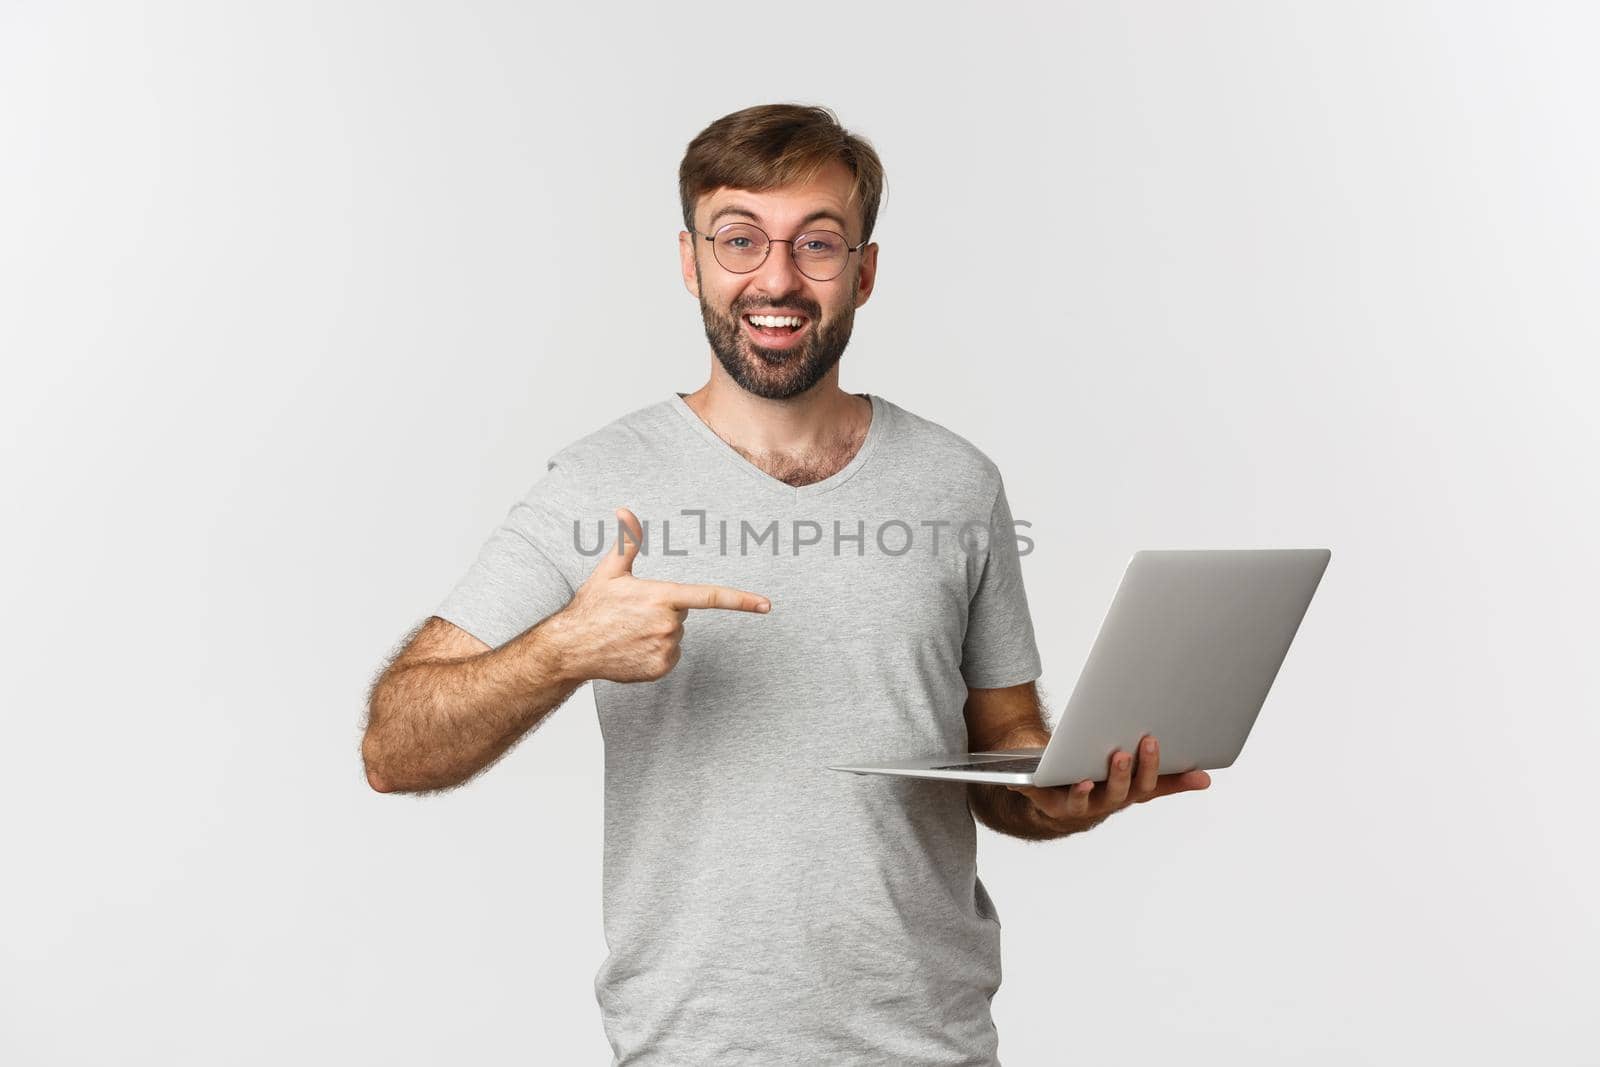 Image of handsome man with beard, wearing glasses and gray t-shirt, pointing at laptop and smiling, recommend something, standing over white background.